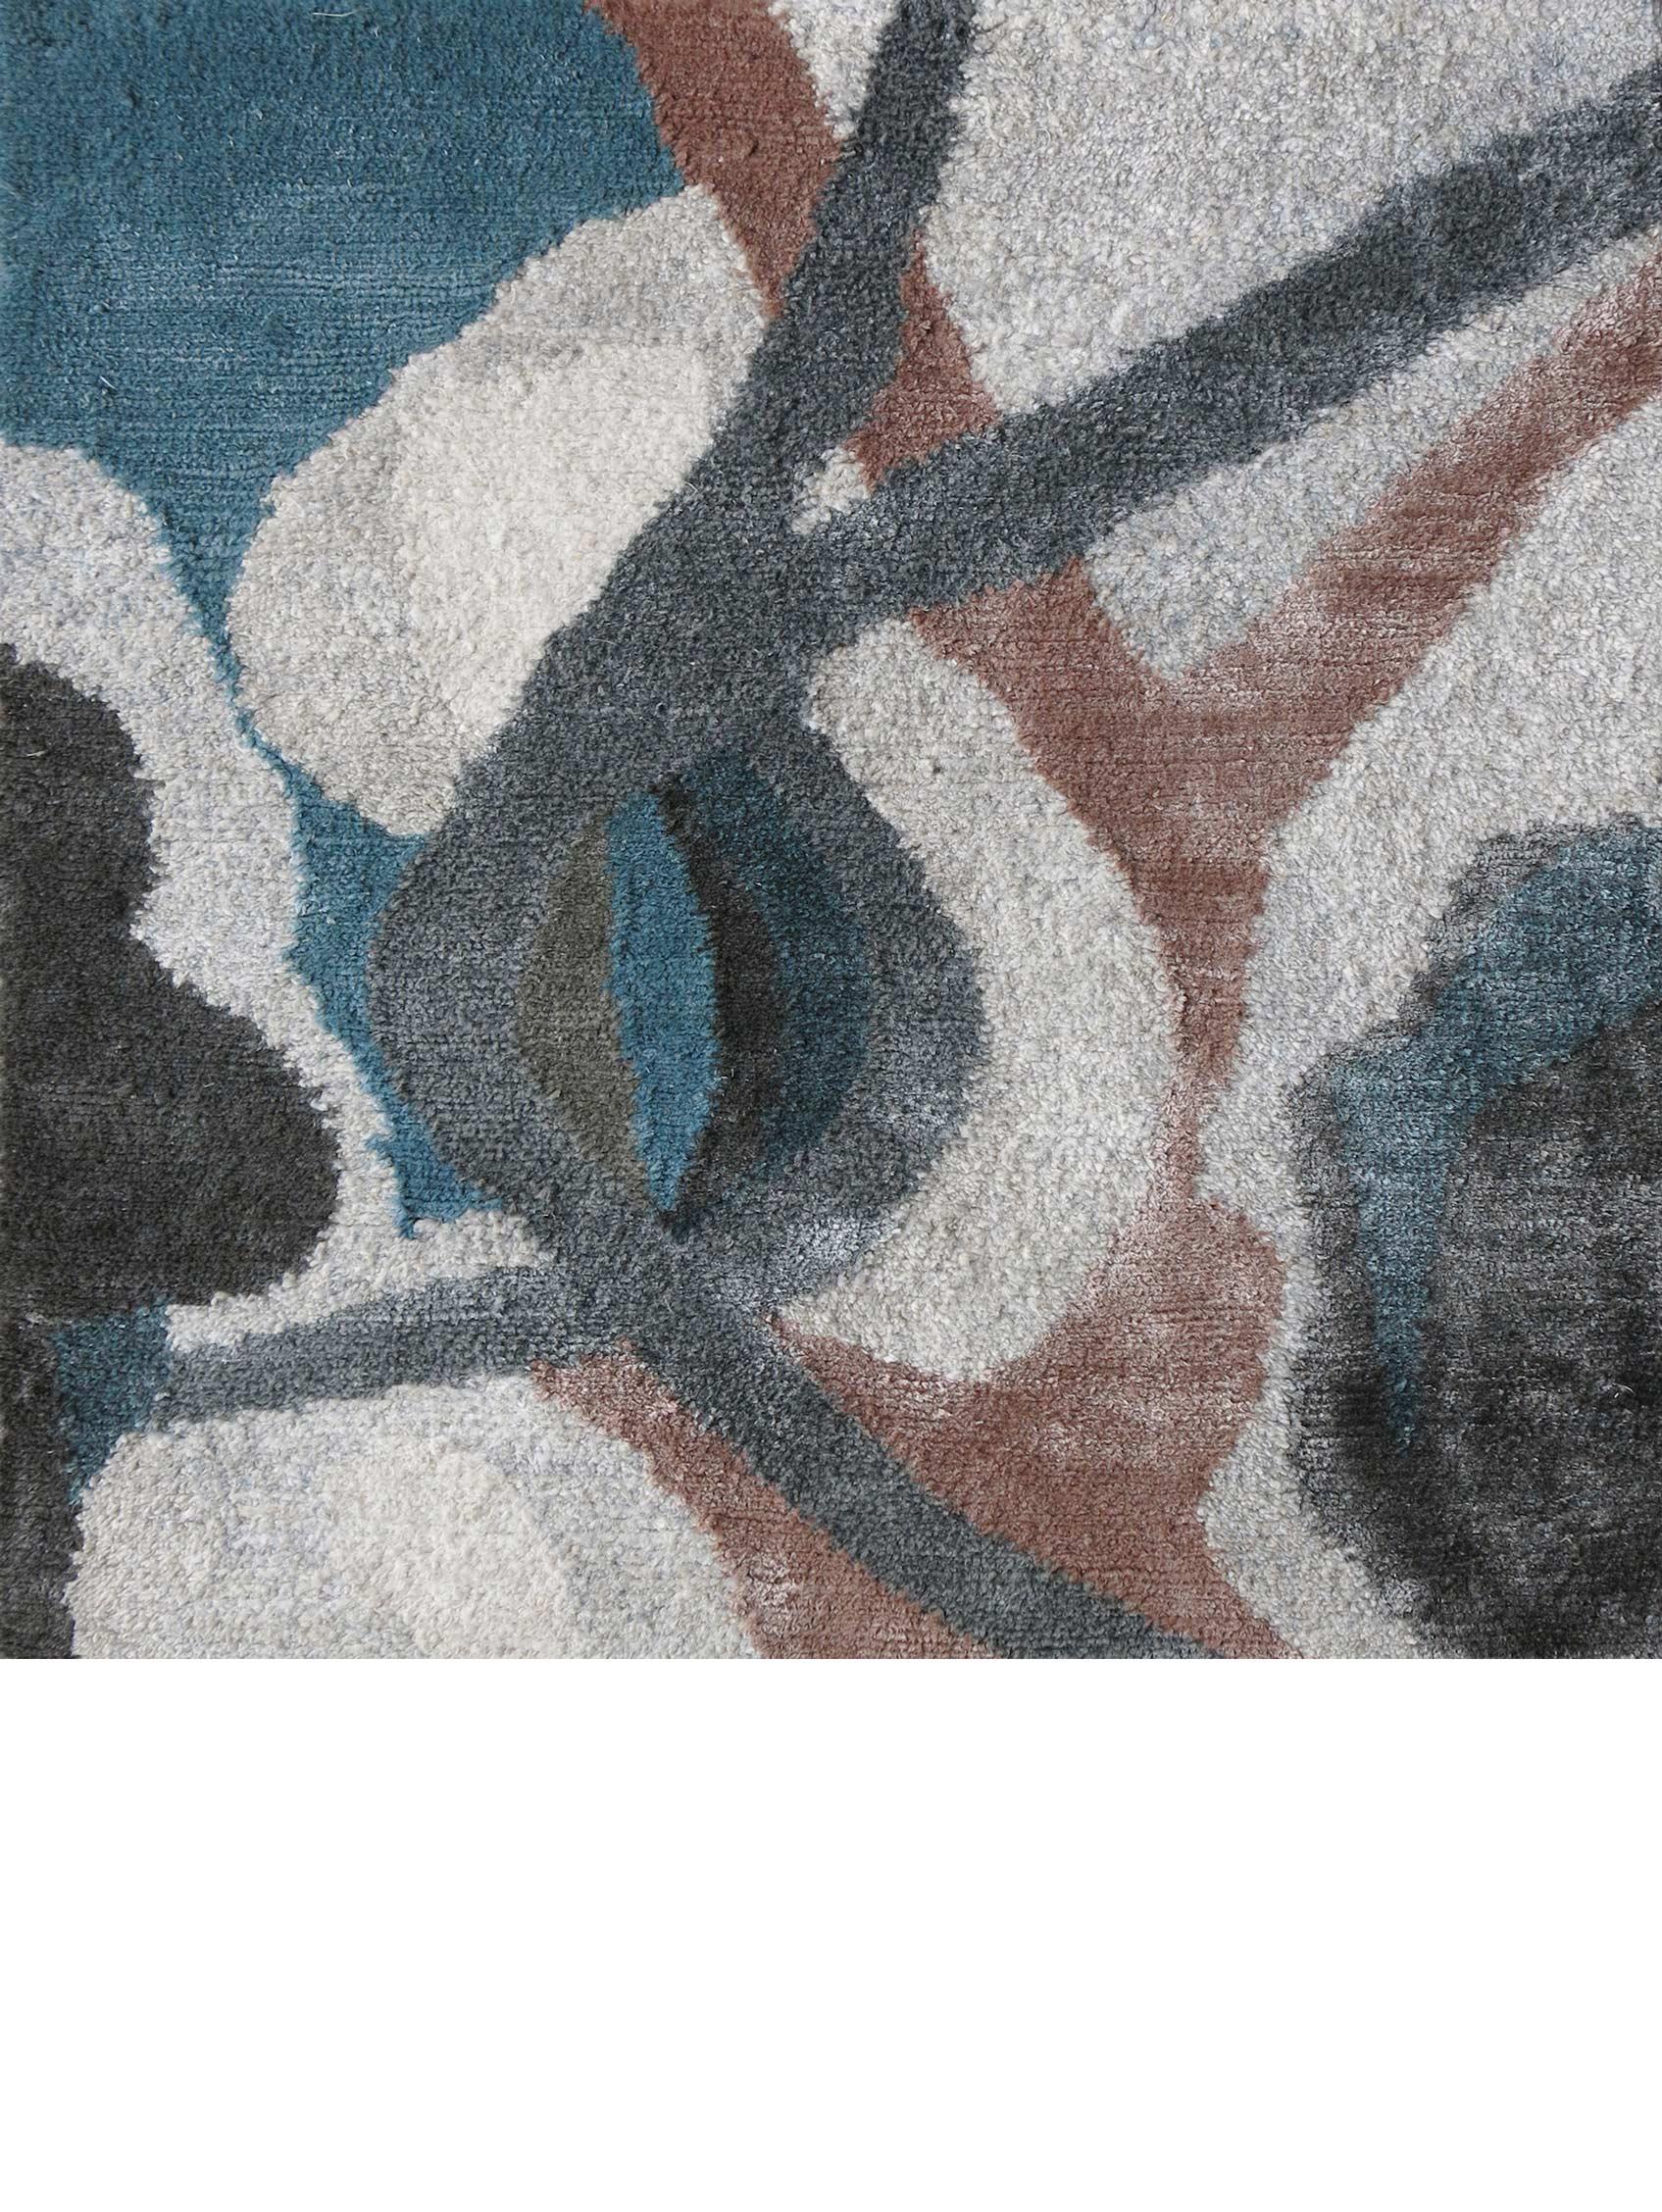 Kalypto Hand-Knotted Rug by Eskayel.
Dimensions: D 10' x H 8'.
Pile Height: 4 mm. 
Materials: 50% New Zealand wool, 50% silk.

Eskayel hand-knotted rugs are woven to order and can be customized in various sizes, colors, materials, and weave